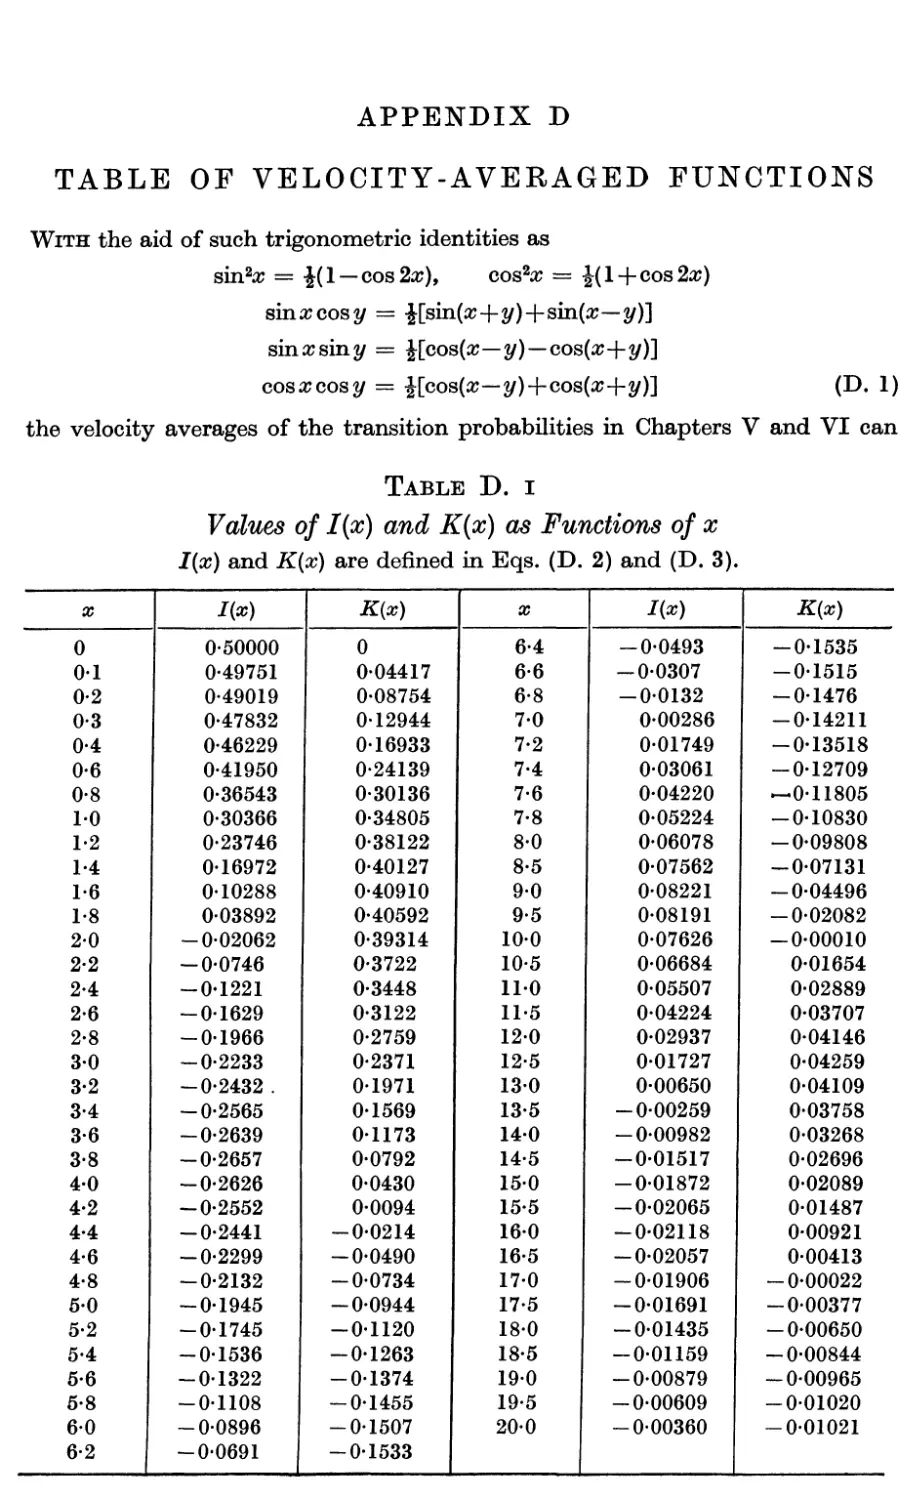 D. Table of Velocity-averaged Functions